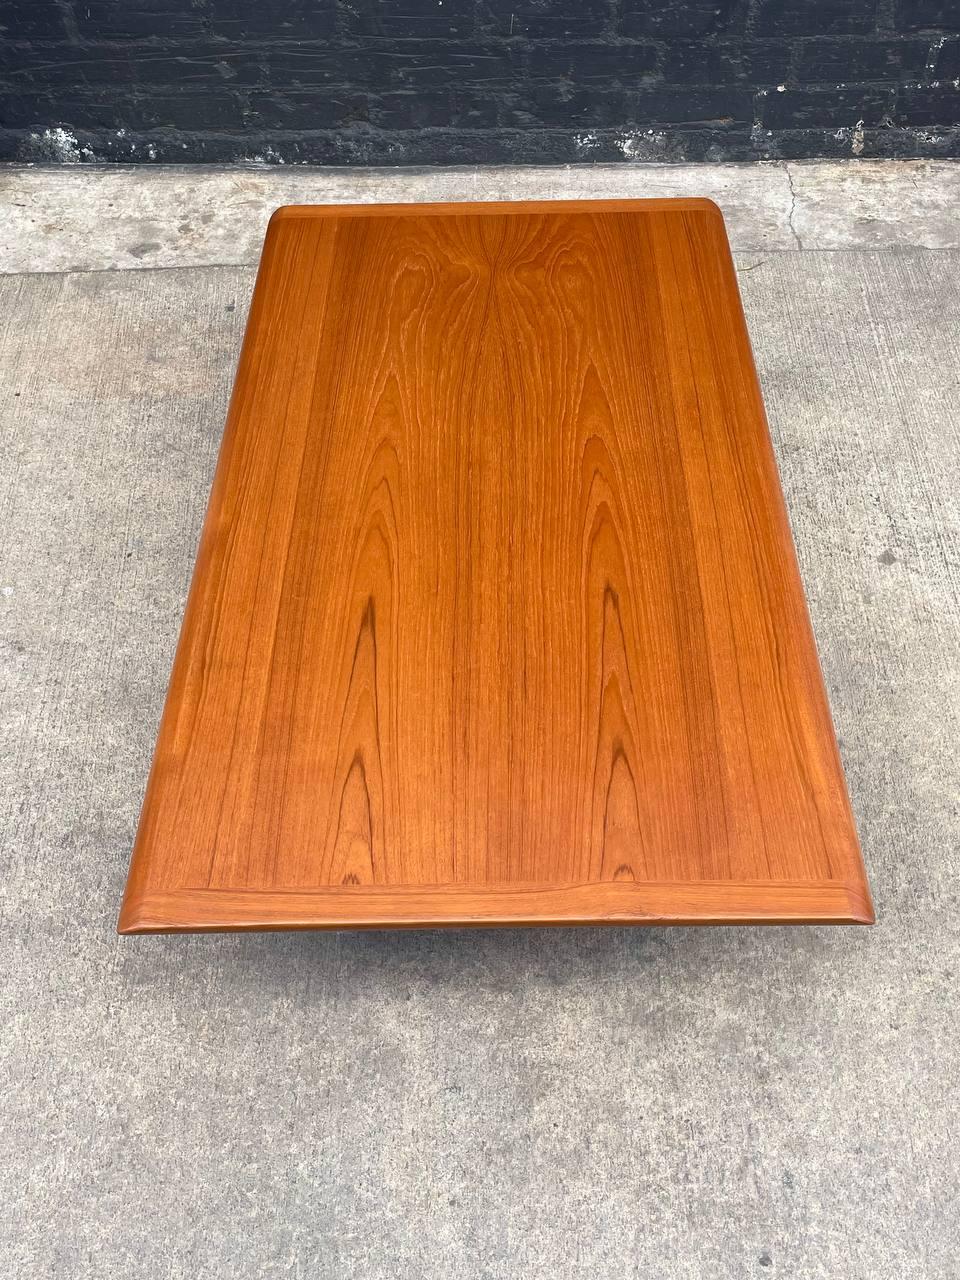 Newly Refinished - Mid-Century Danish Modern Teak Coffee Table by Vejle Stole For Sale 3